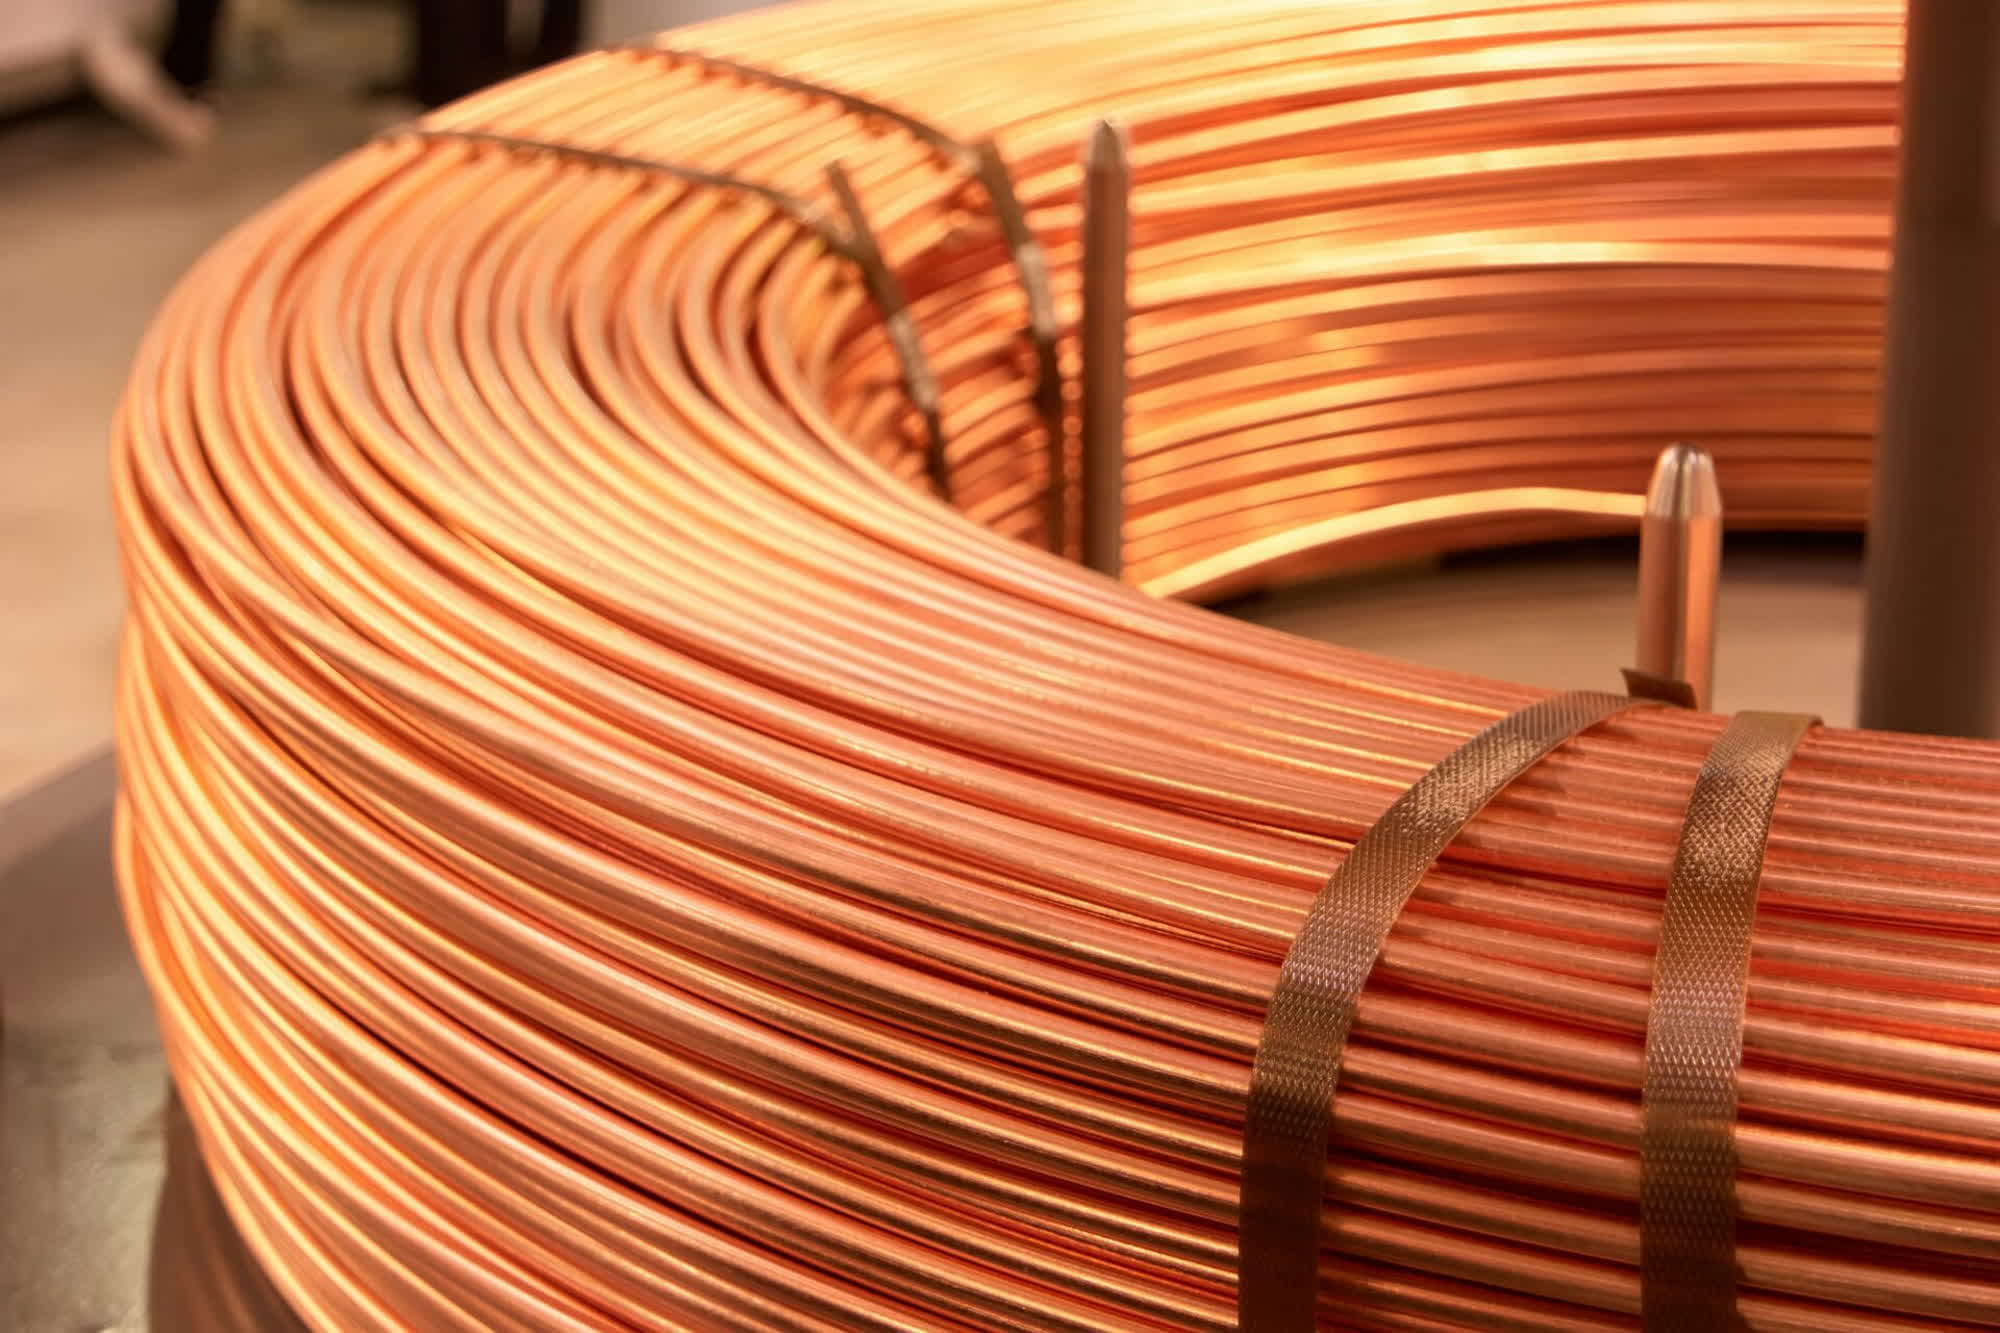 Telcos happen to be sitting on a gold mine of buried copper wire